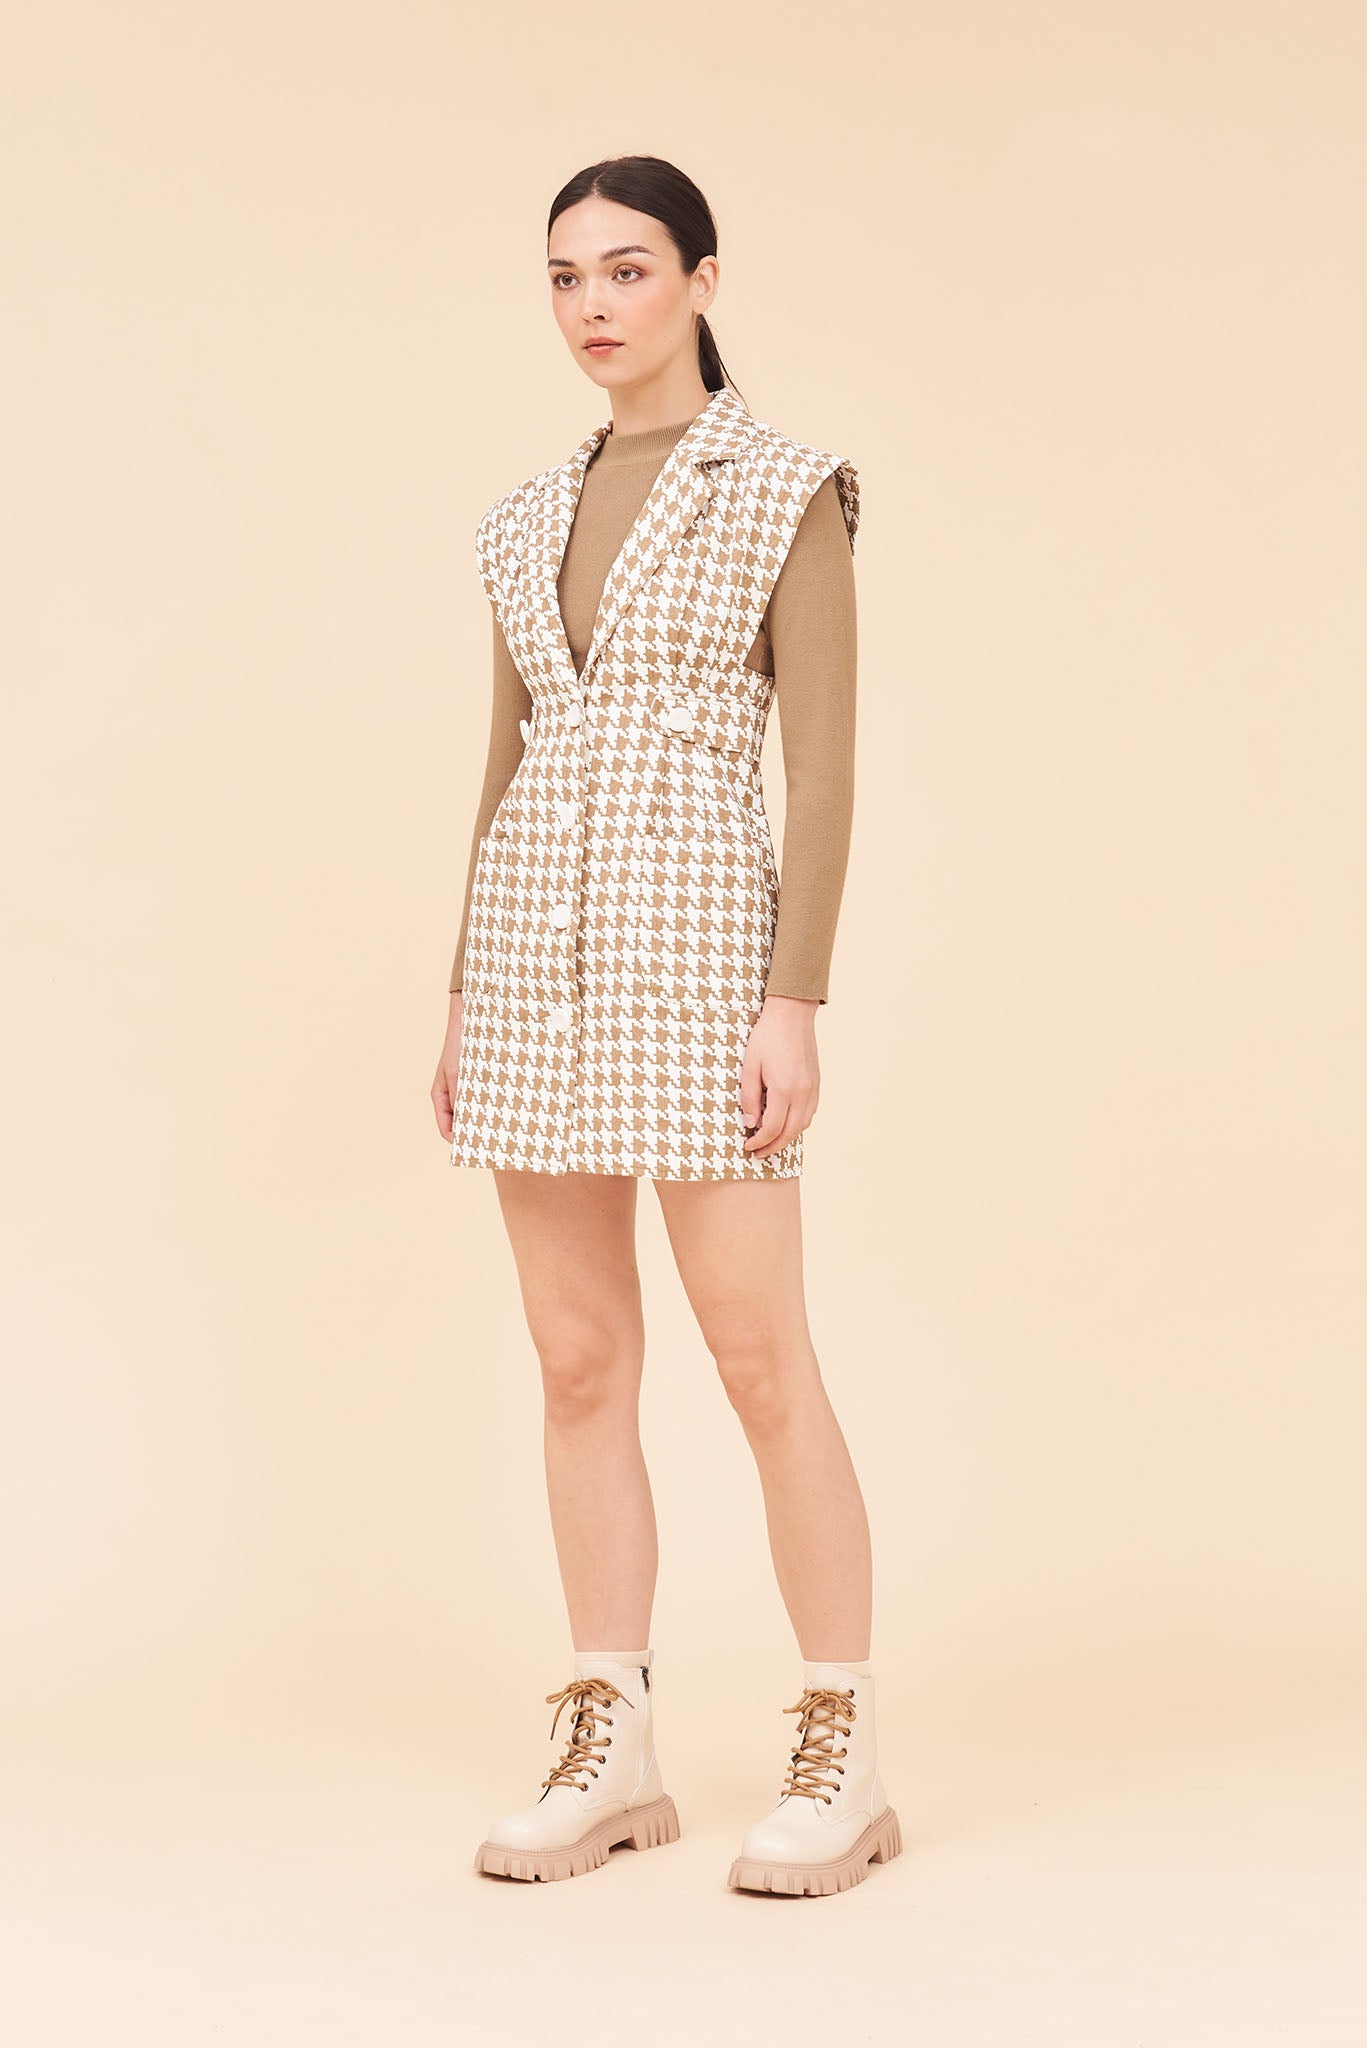 "HOPE" Houndstooth Cotton Twill Tailored Tuxedo Vest Dress